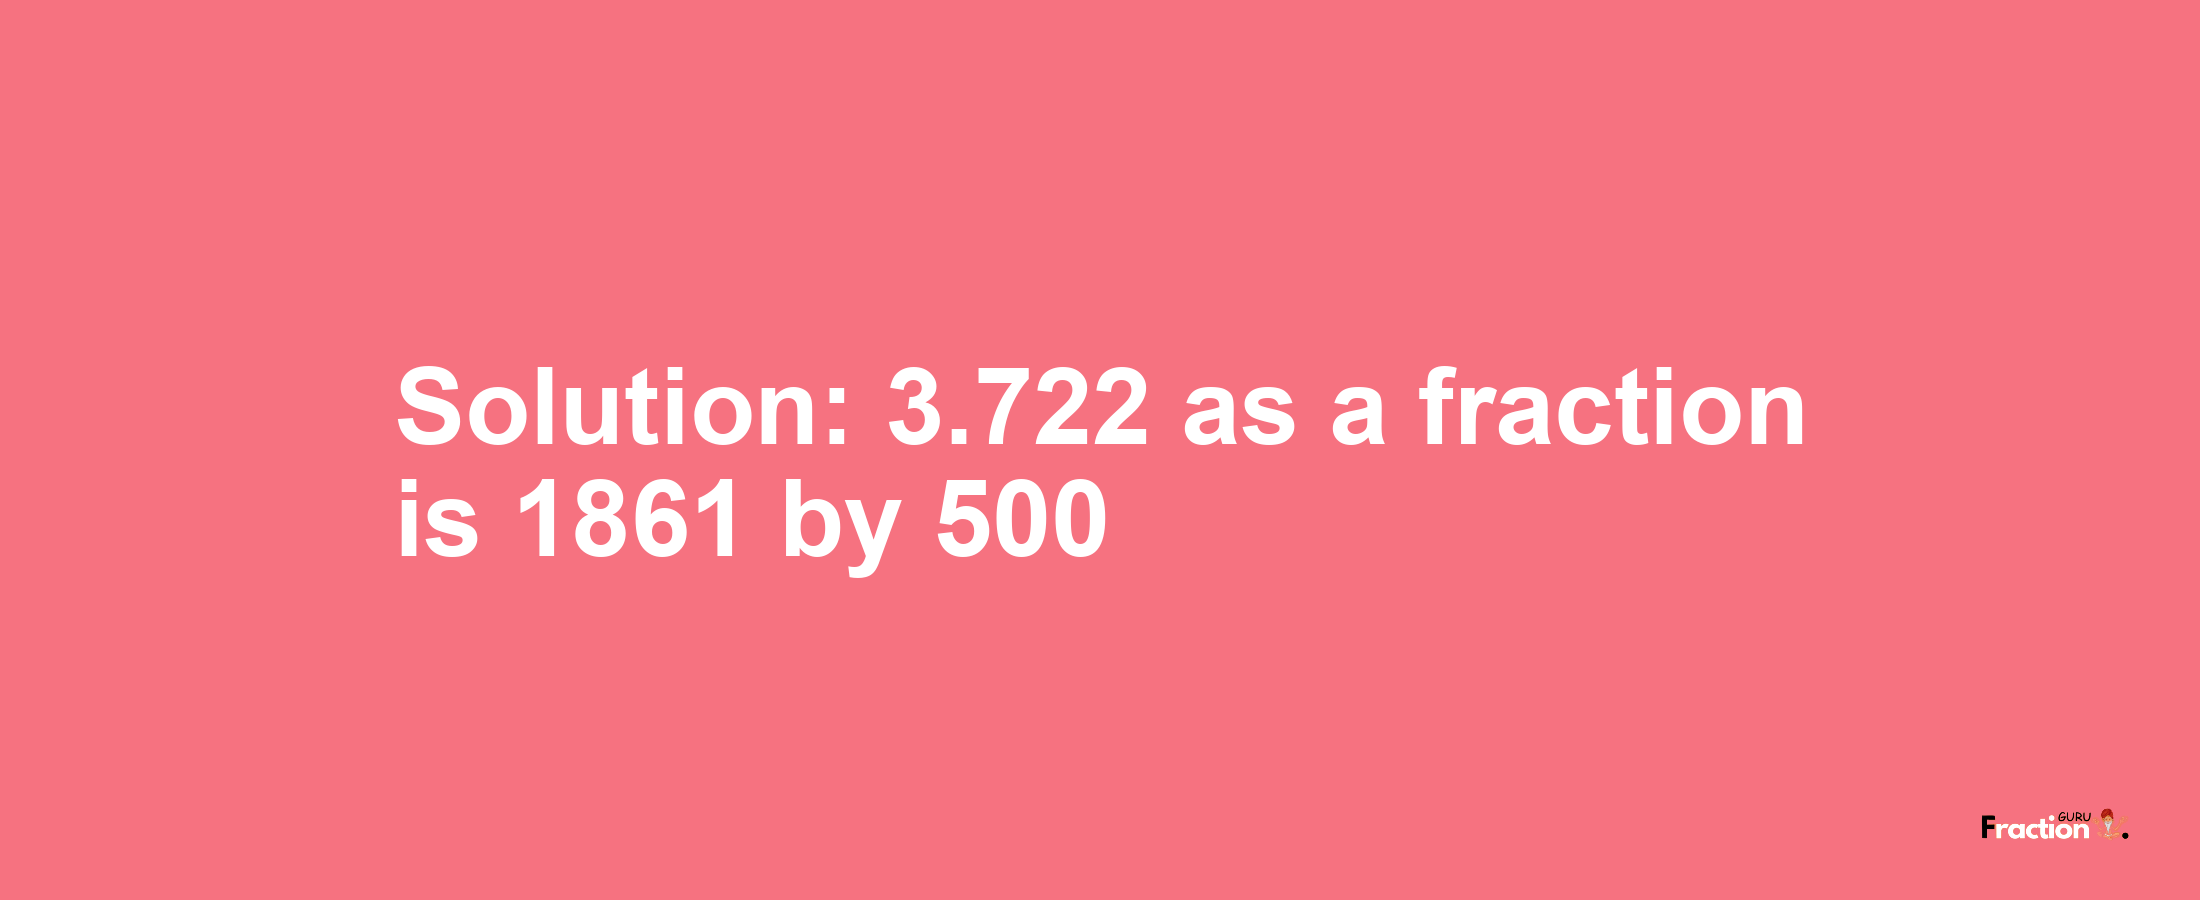 Solution:3.722 as a fraction is 1861/500